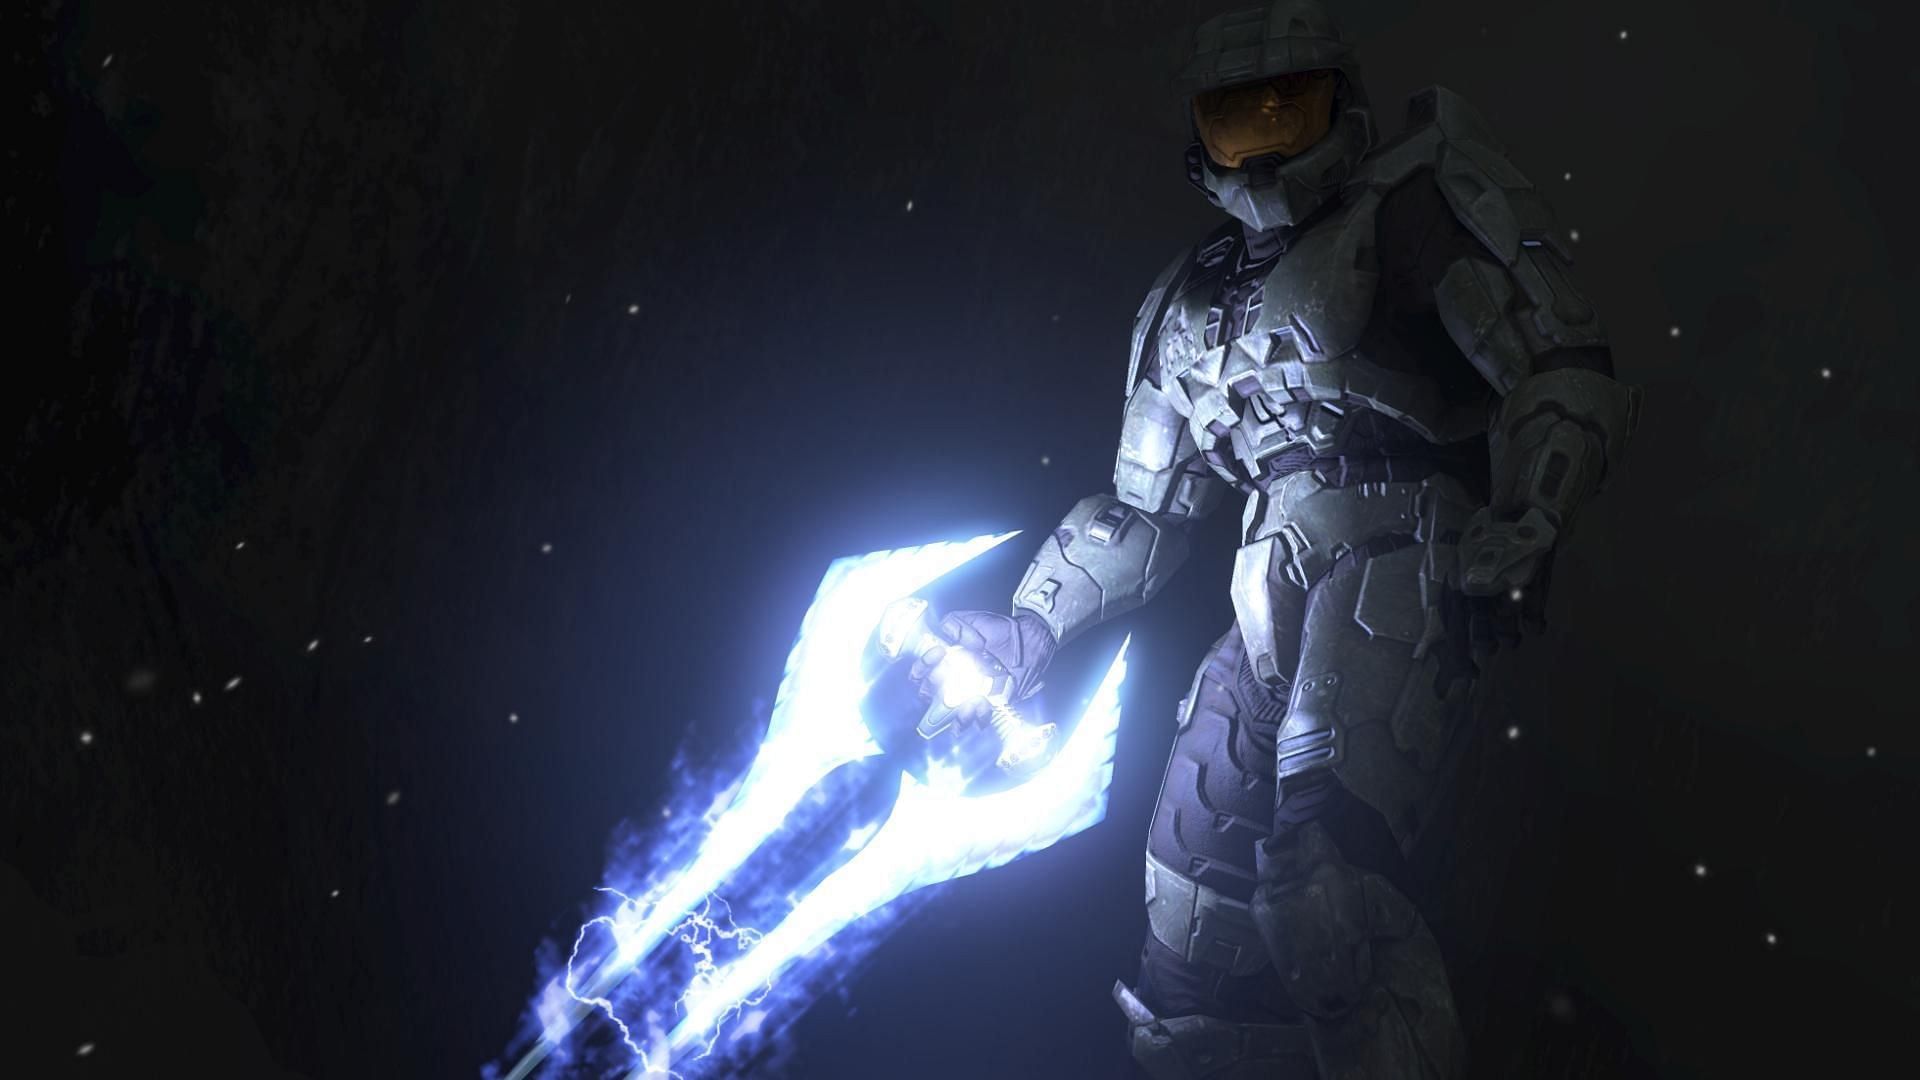 The energy sword is one of the strongest weapons in Halo video games (Image via 343 Industries)